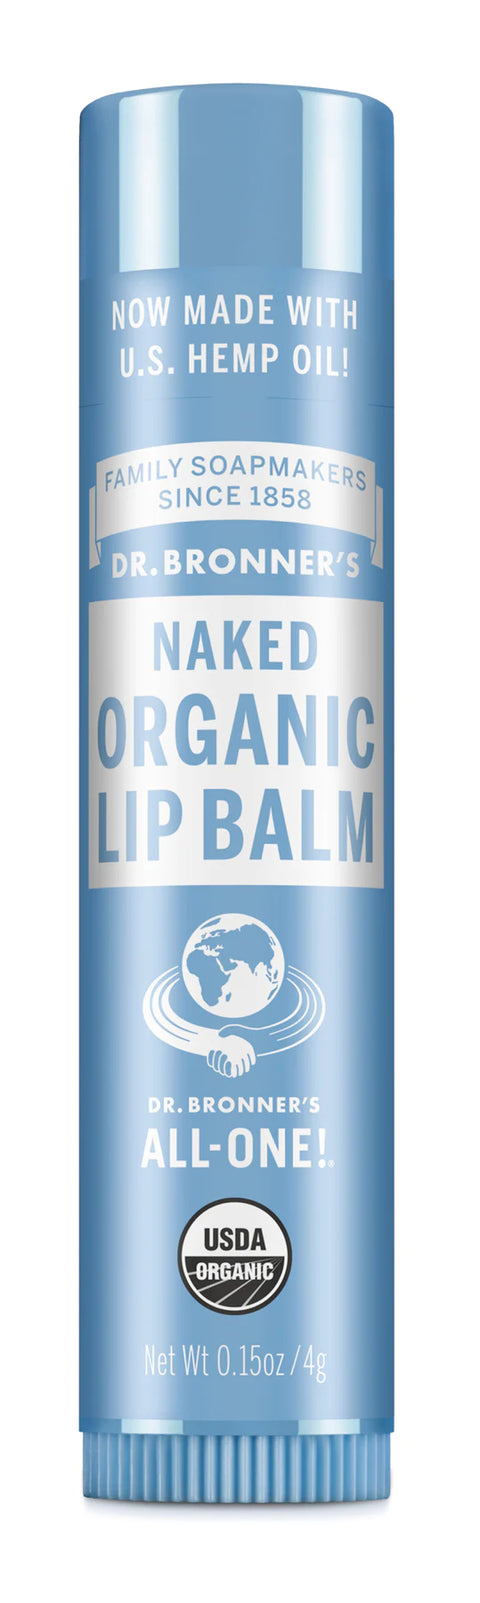 Dr. Bronner's Organic Lip Balm, Naked Unscented